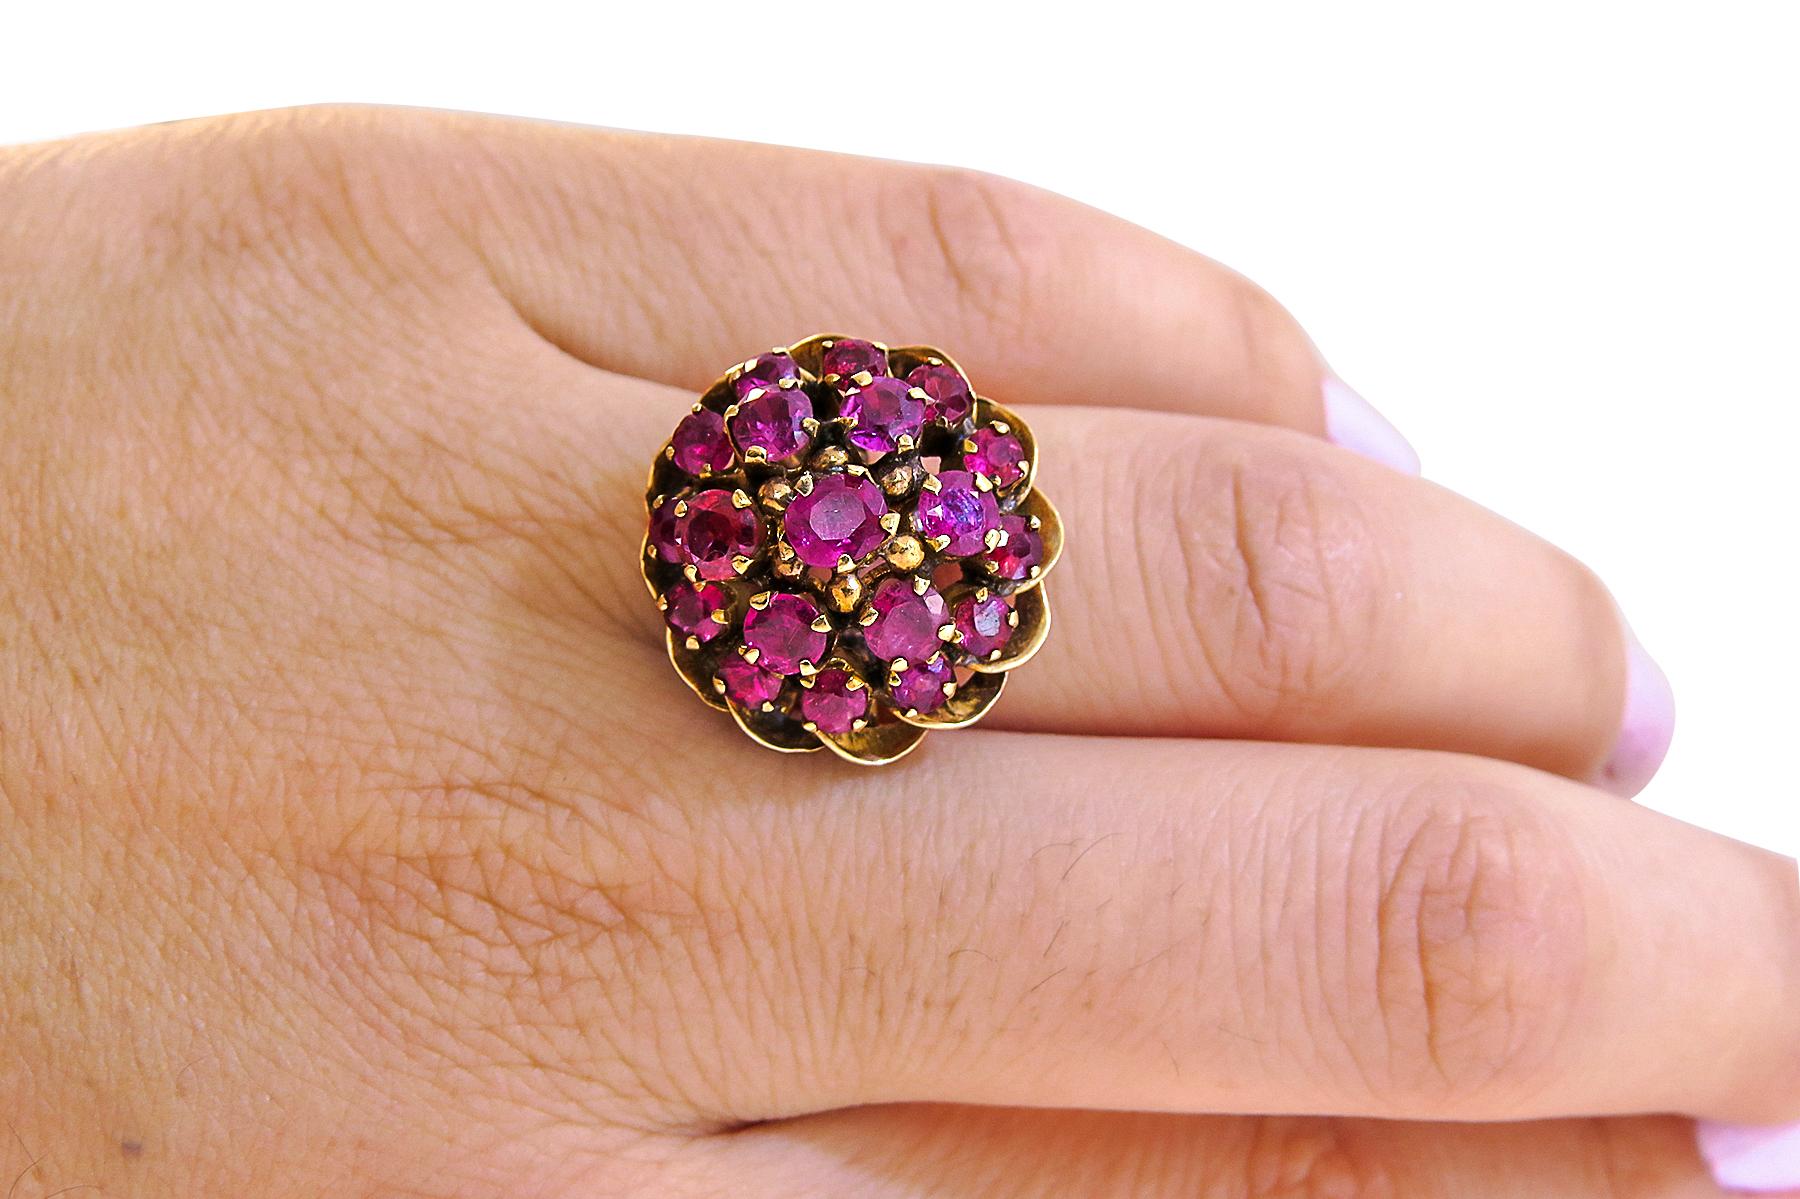 14k Yellow Gold
Weight= 5.8 gr
Size=5
Ruby= 3 ct total 
